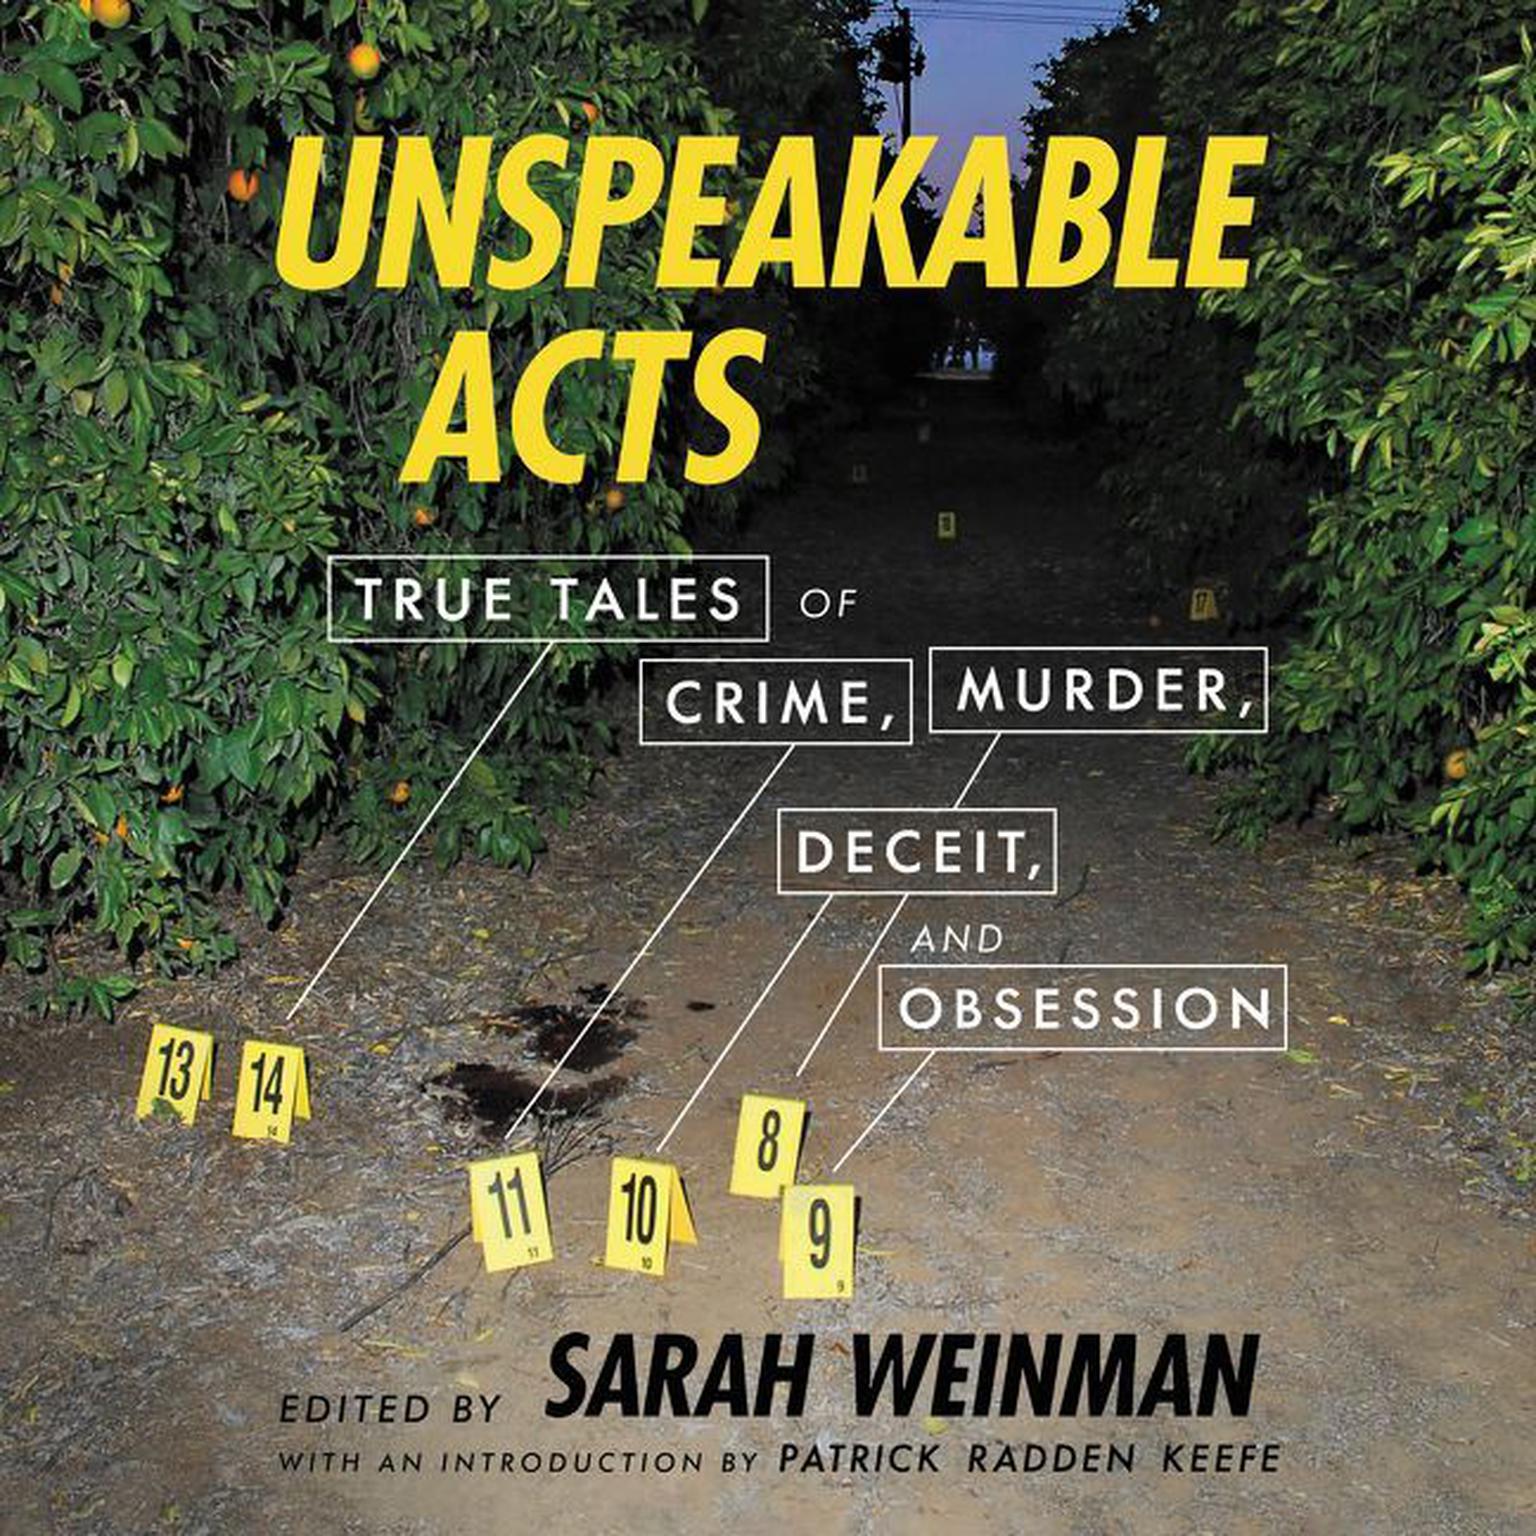 Unspeakable Acts: True Tales of Crime, Murder, Deceit, and Obsession Audiobook, by Sarah Weinman